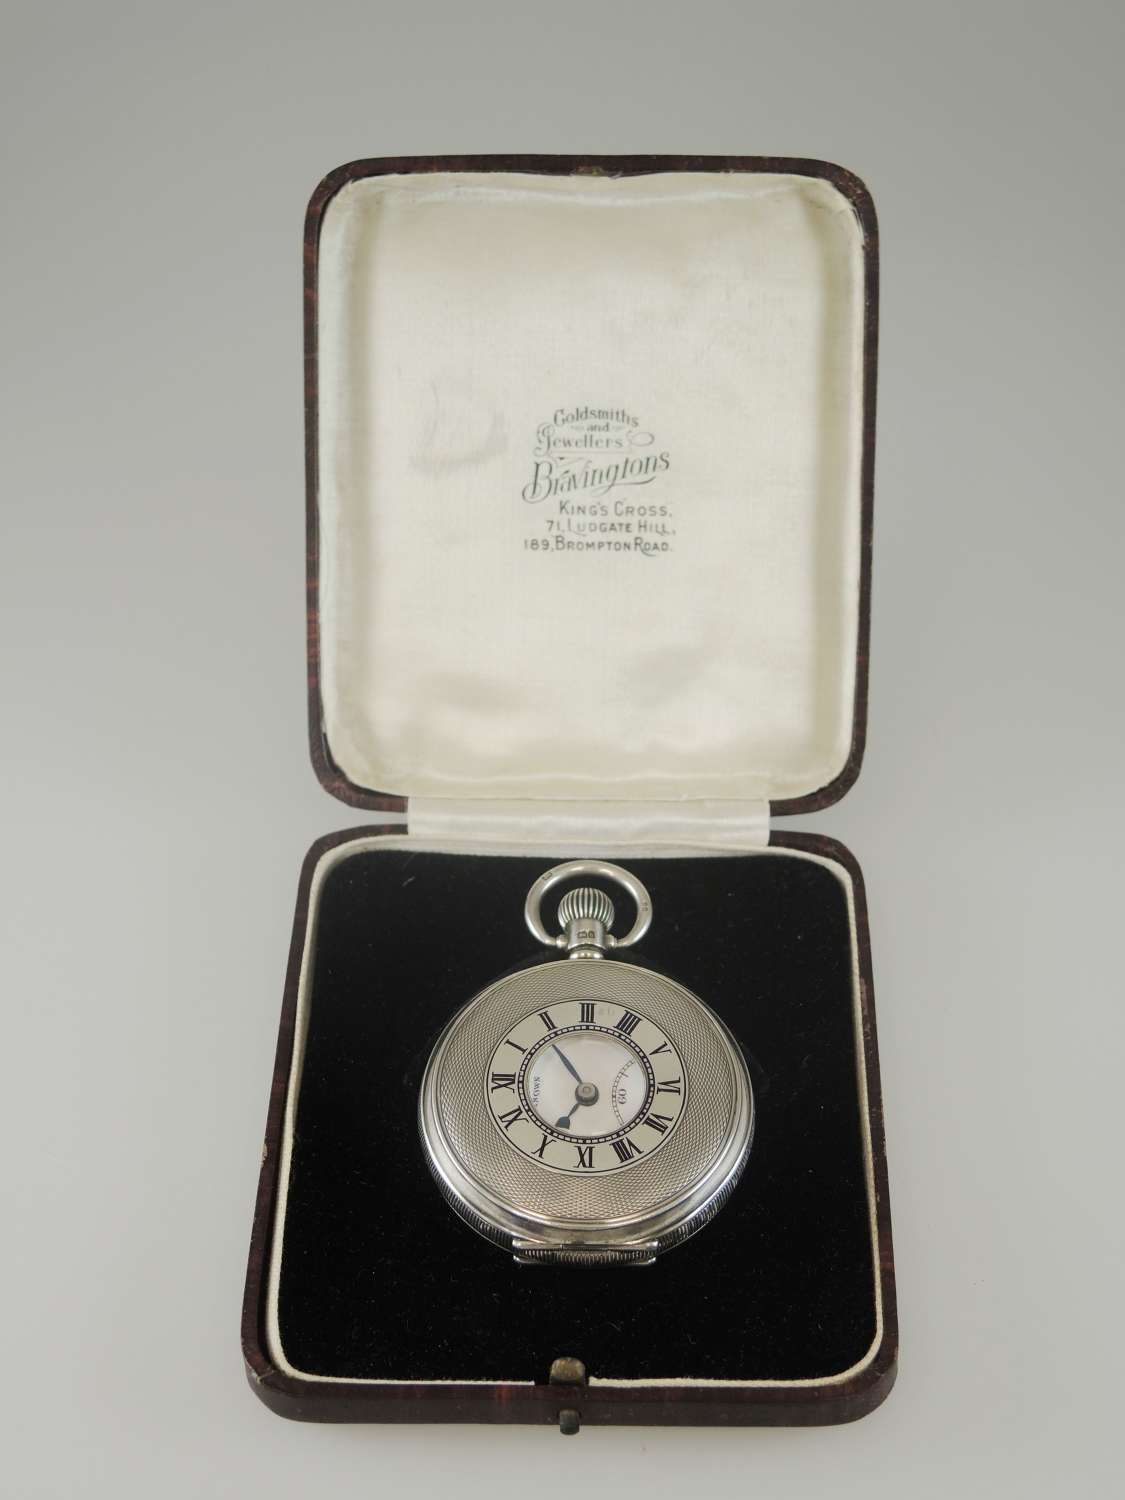 Mint example of a silver half hunter pocket watch by Bravington c1943